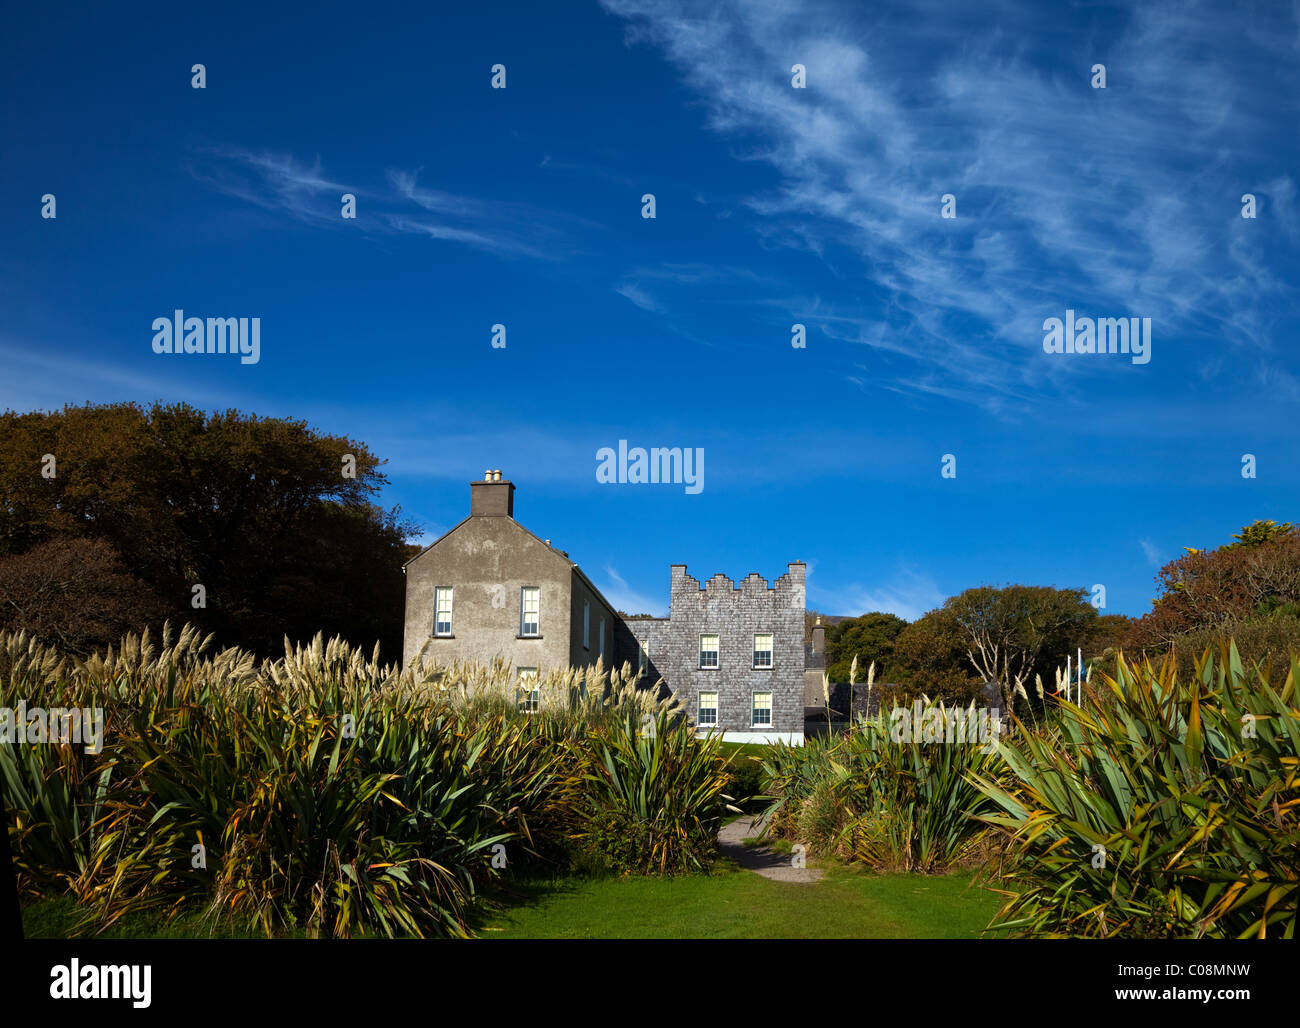 Derrynane House, the Home of Daniel O'Connell, Near Caherdaniel, The Ring of Kerry, County Kerry, Ireland Stock Photo